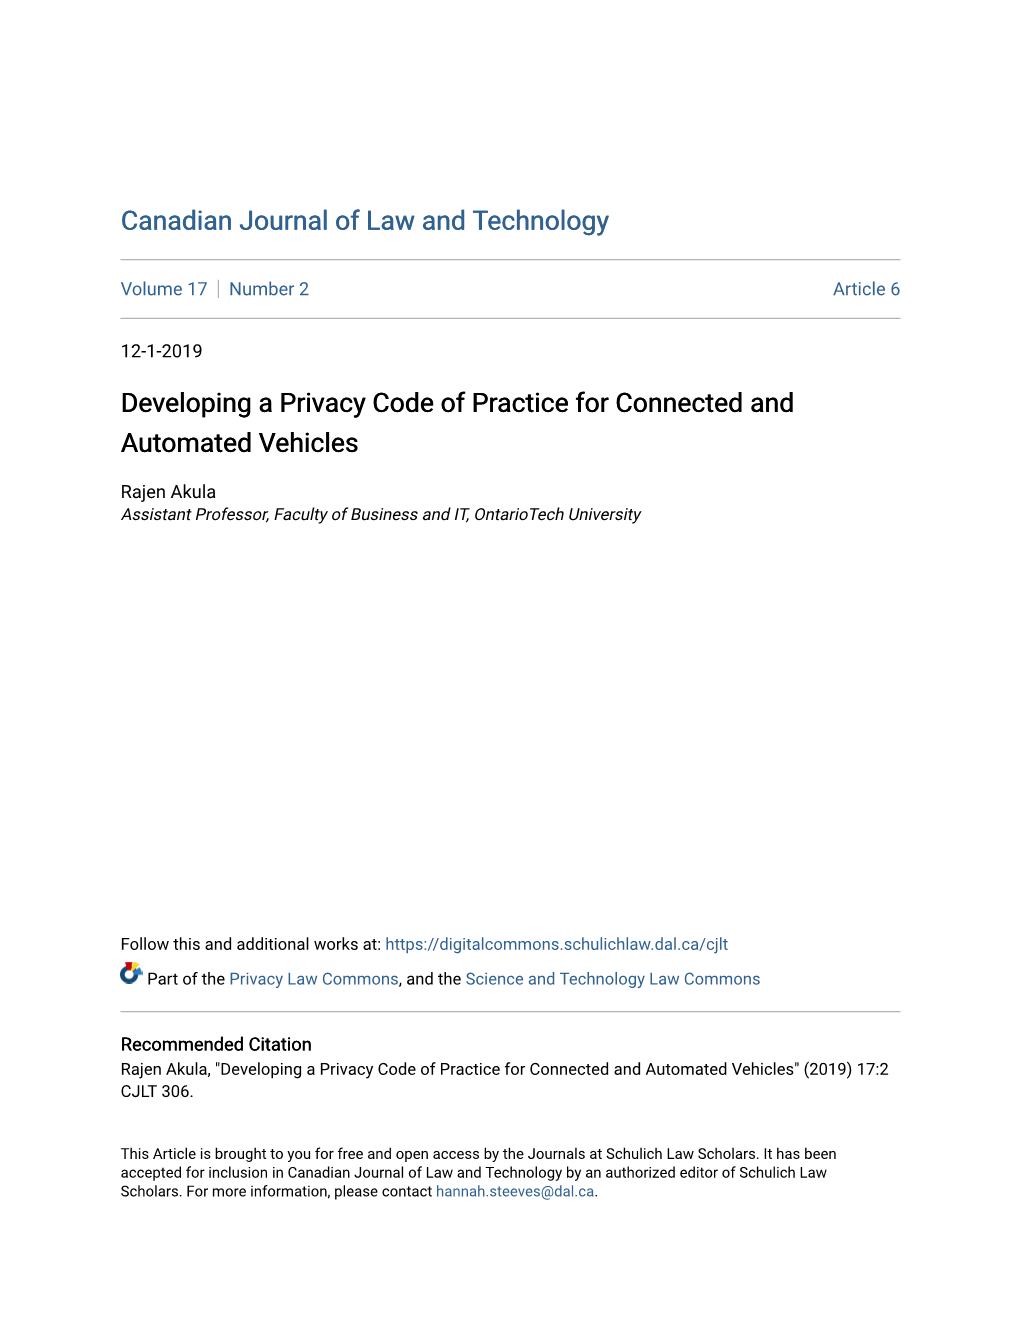 Developing a Privacy Code of Practice for Connected and Automated Vehicles